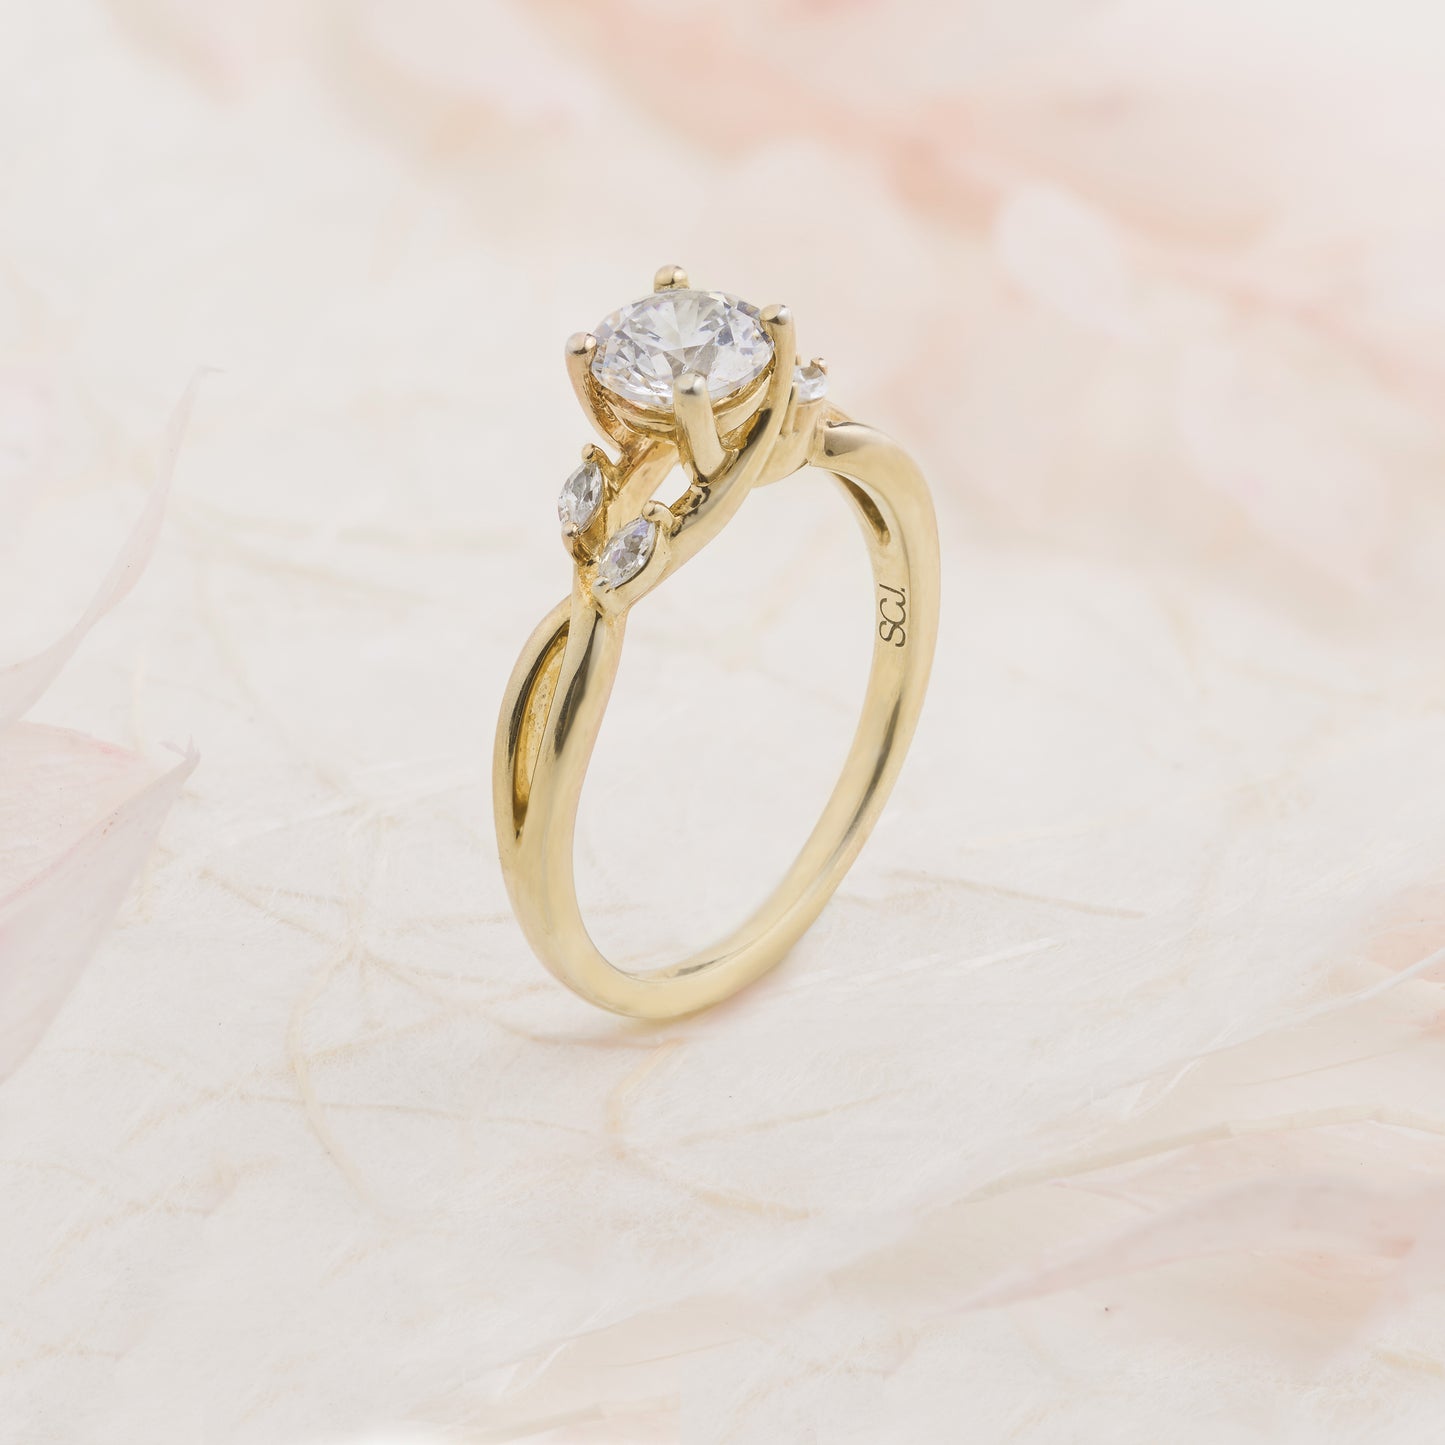 18K Yellow Gold Round Brilliant Diamond Solitaire with Marquise Shoulder Accents Engagement Ring 1.0tdw